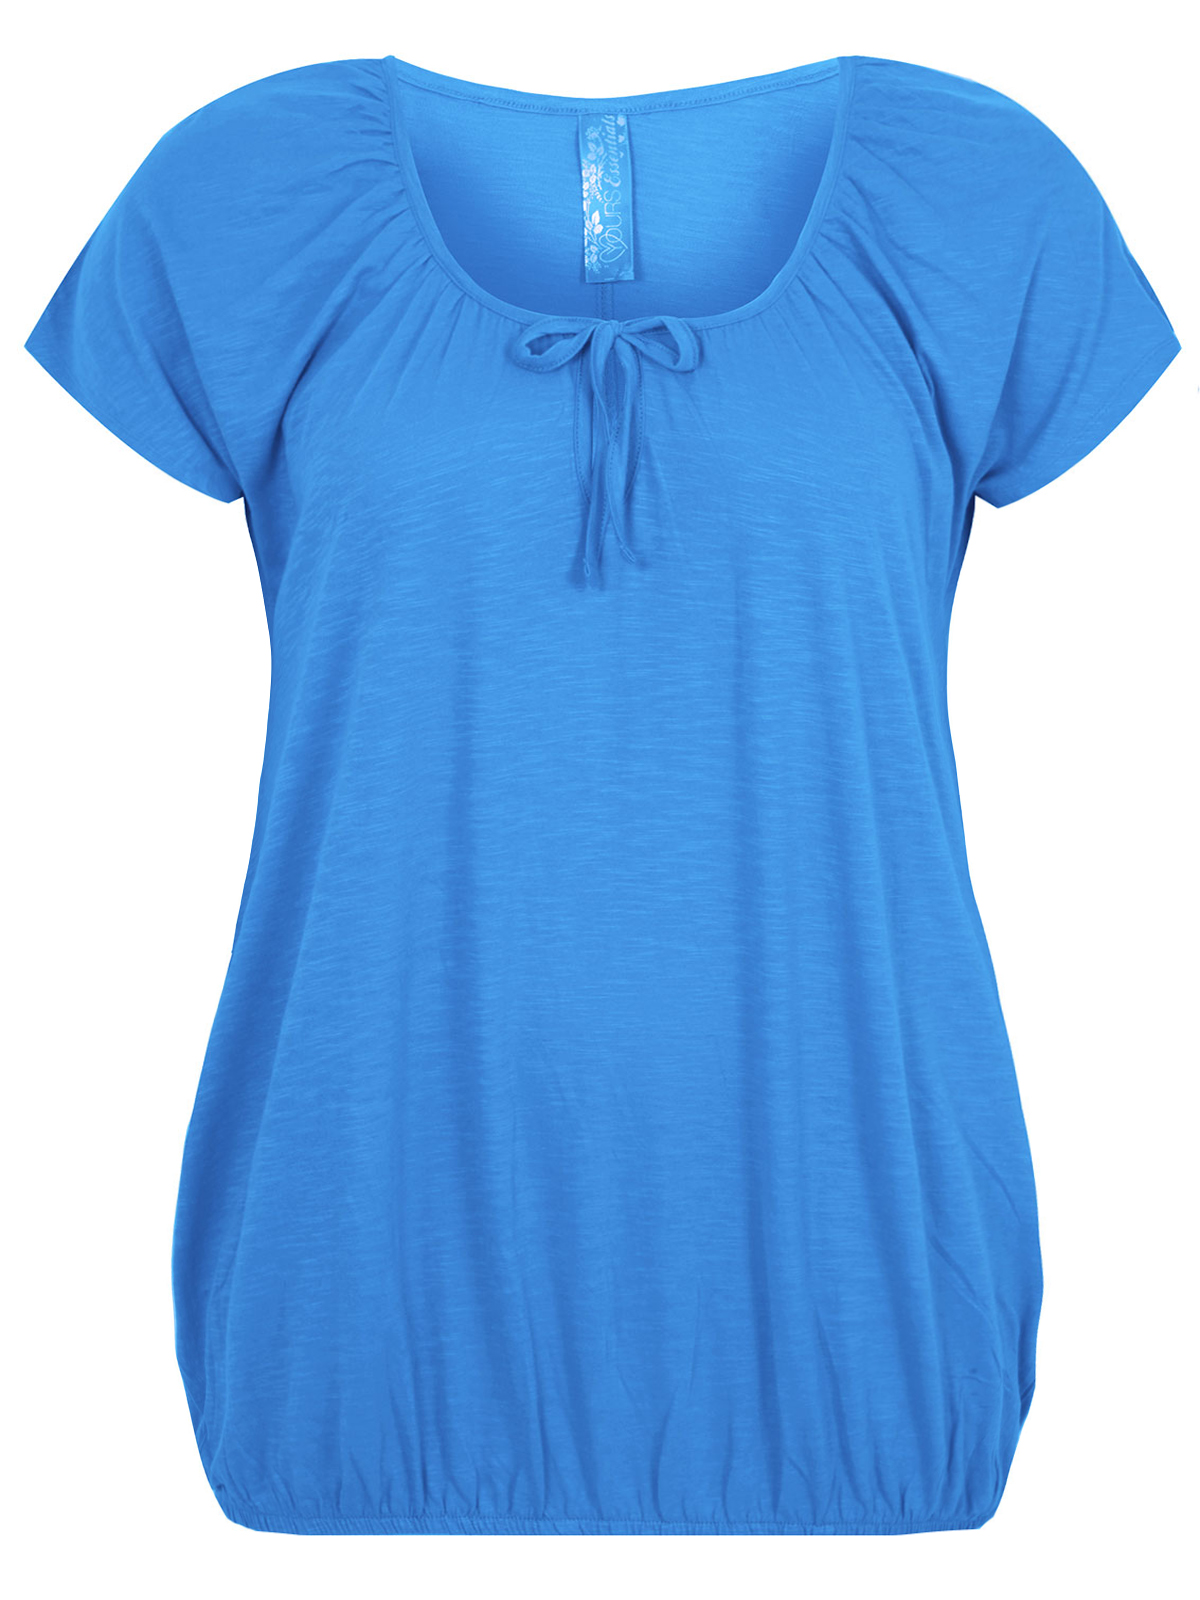 CURVE - - Yours BLUE Bubble Hem Gypsy Top - Plus Size 16 to 34/36